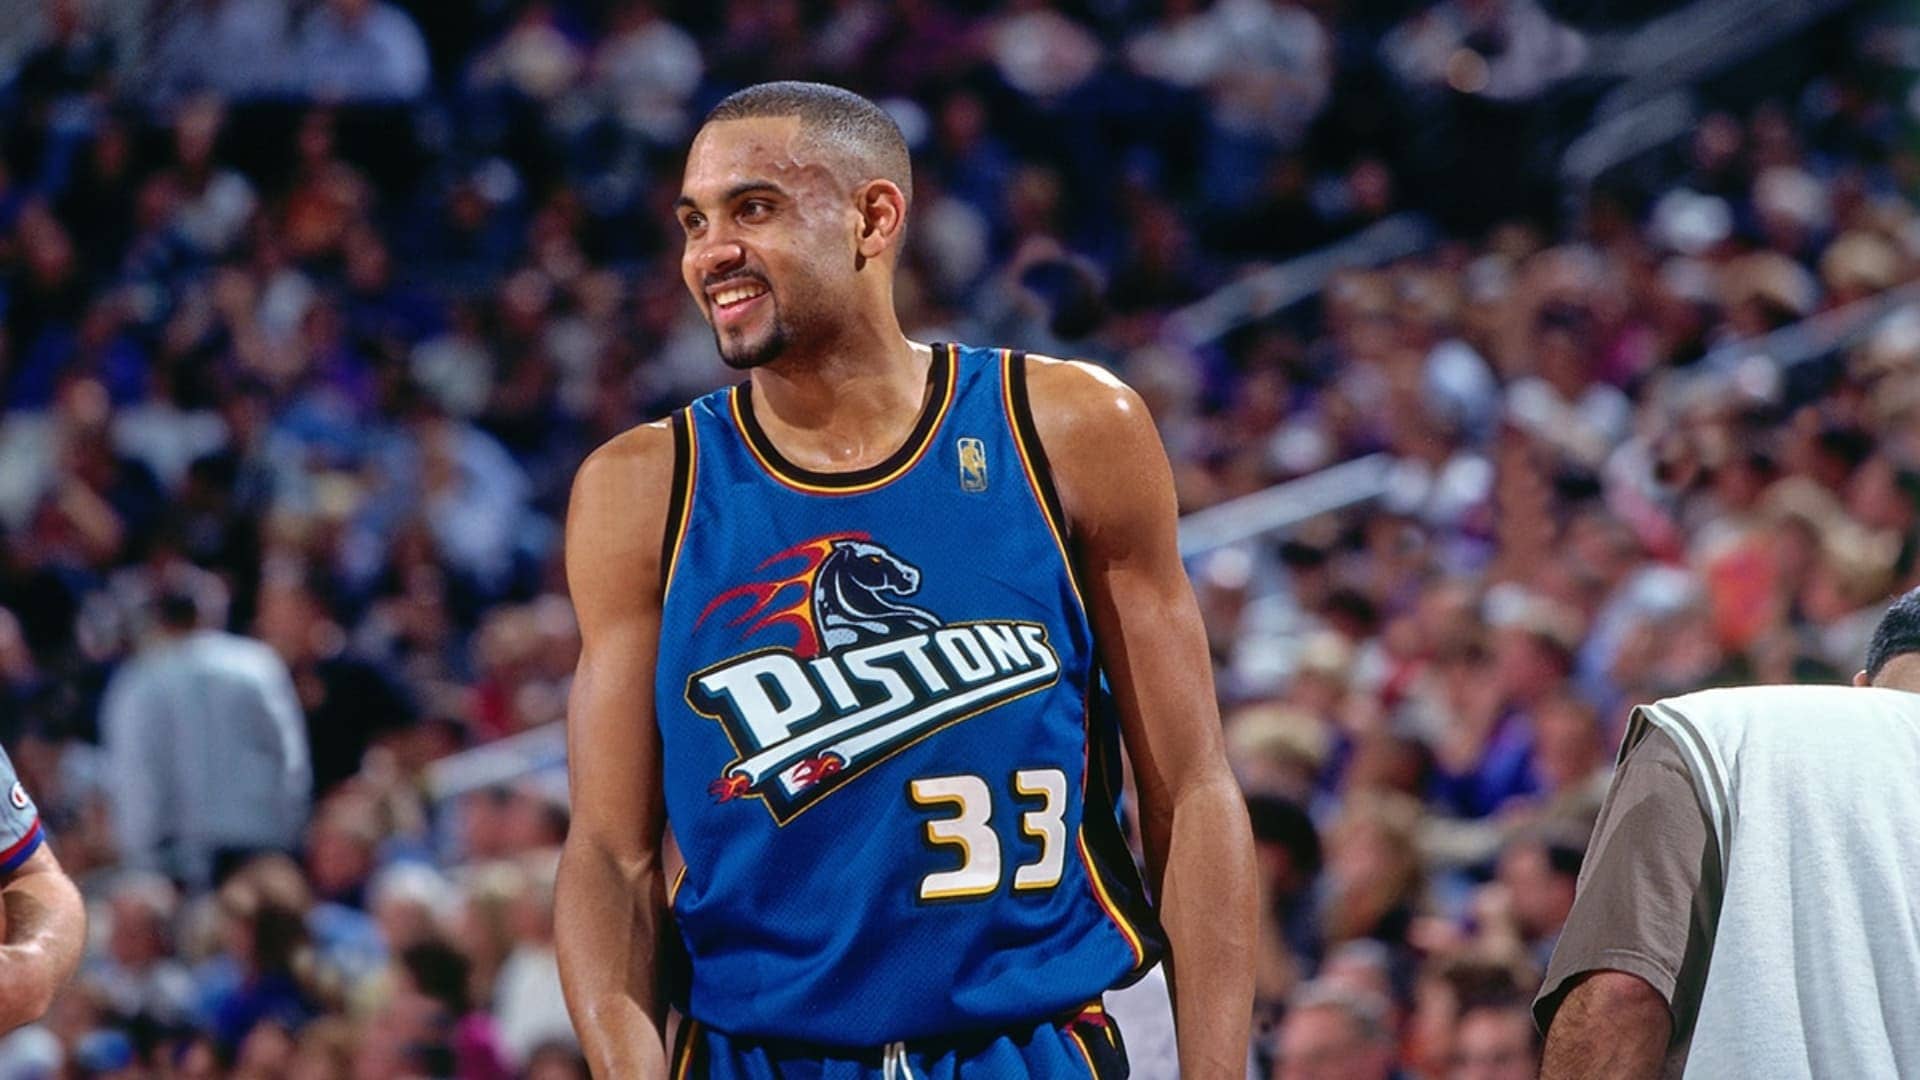 Grant hill- Duke NBA Players of All Time